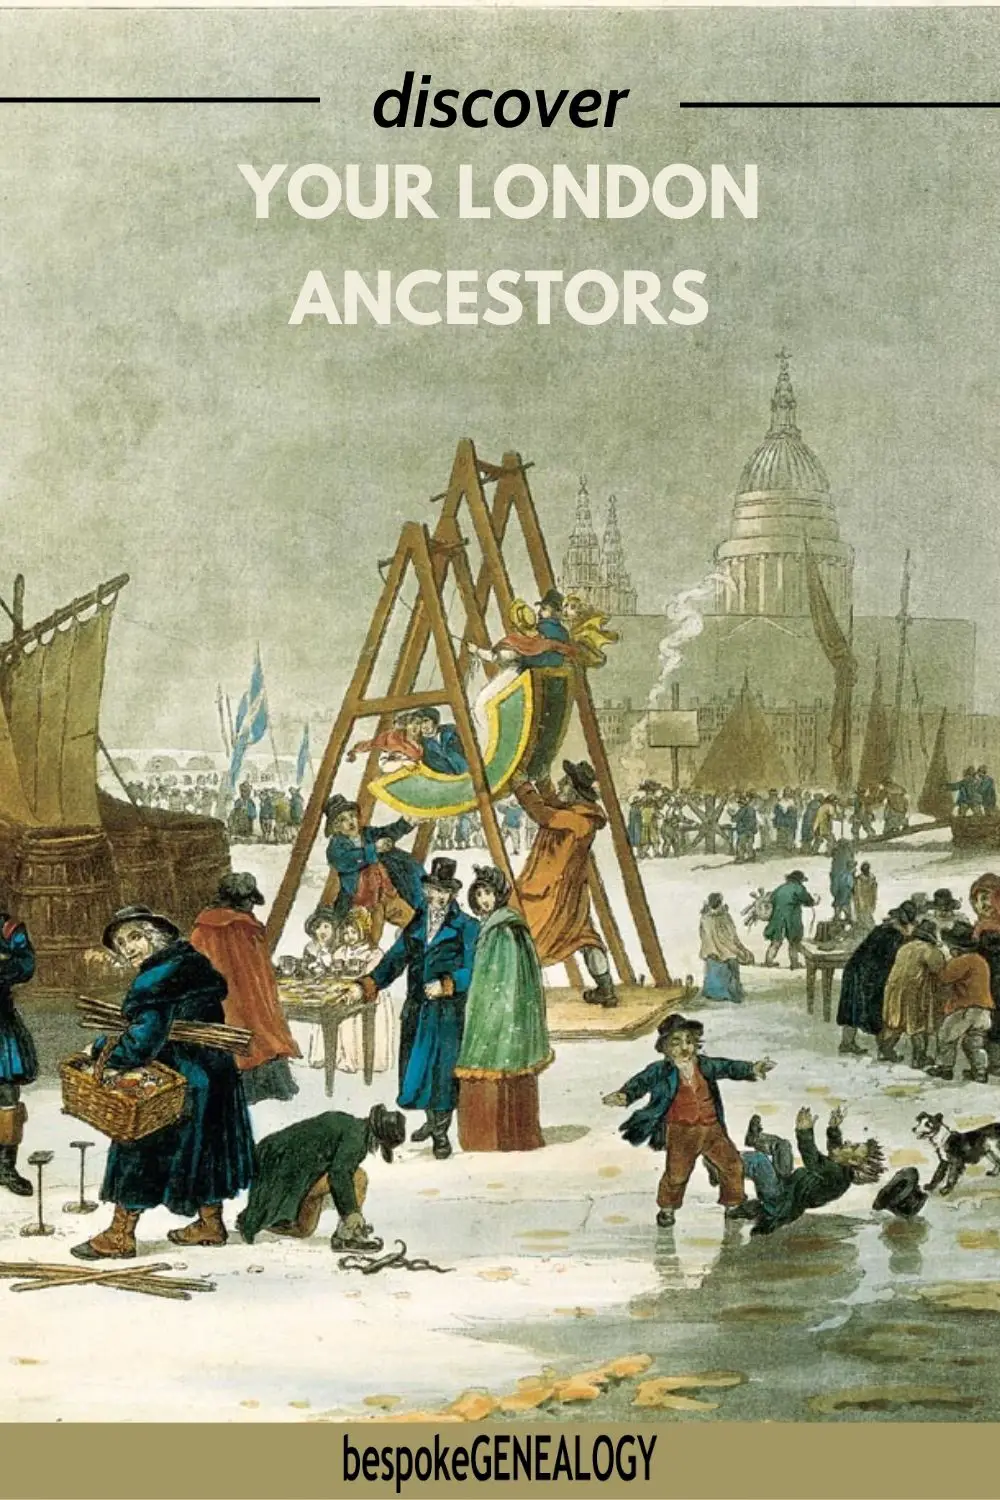 Discover your London ancestors. Part of an 1814 painting depicting the Frost Fair on the River Thames, London.